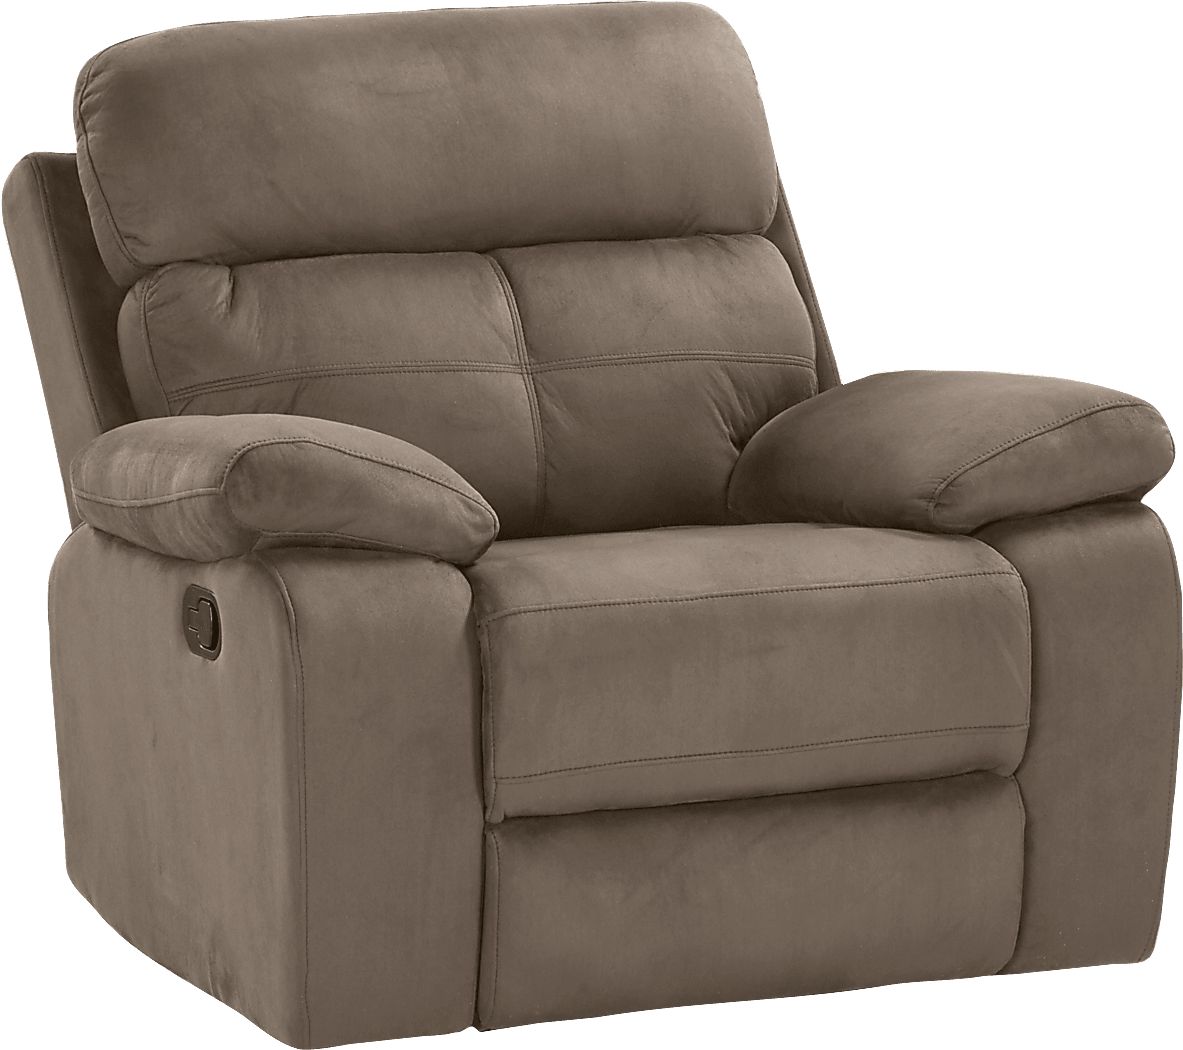 Corinne Stone 3 Pc Living Room with Reclining Sofa